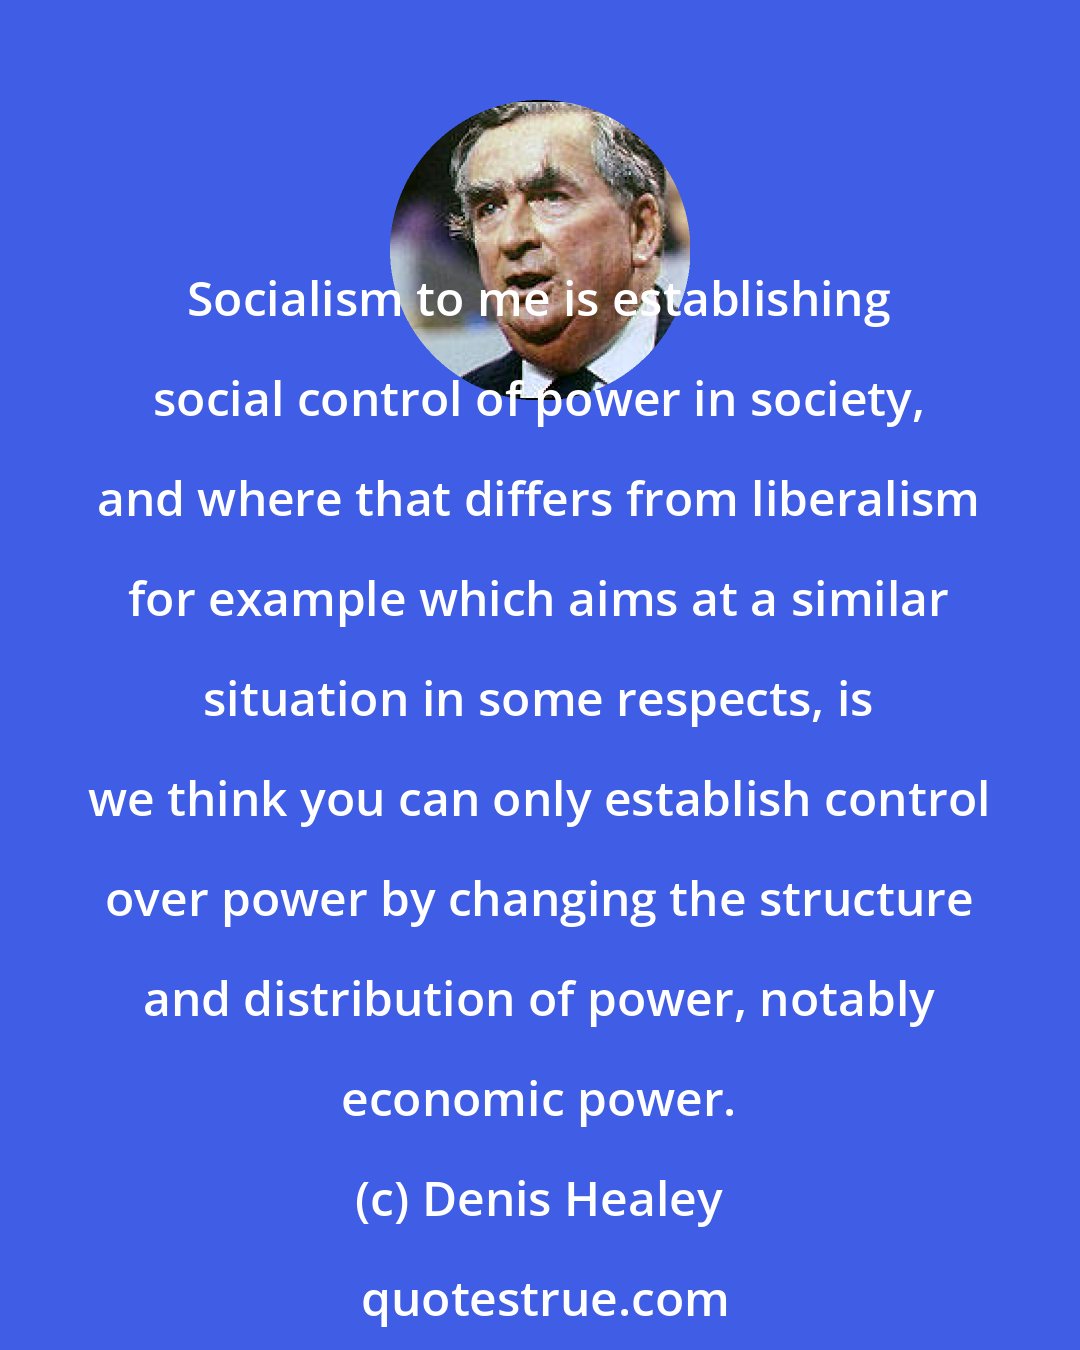 Denis Healey: Socialism to me is establishing social control of power in society, and where that differs from liberalism for example which aims at a similar situation in some respects, is we think you can only establish control over power by changing the structure and distribution of power, notably economic power.